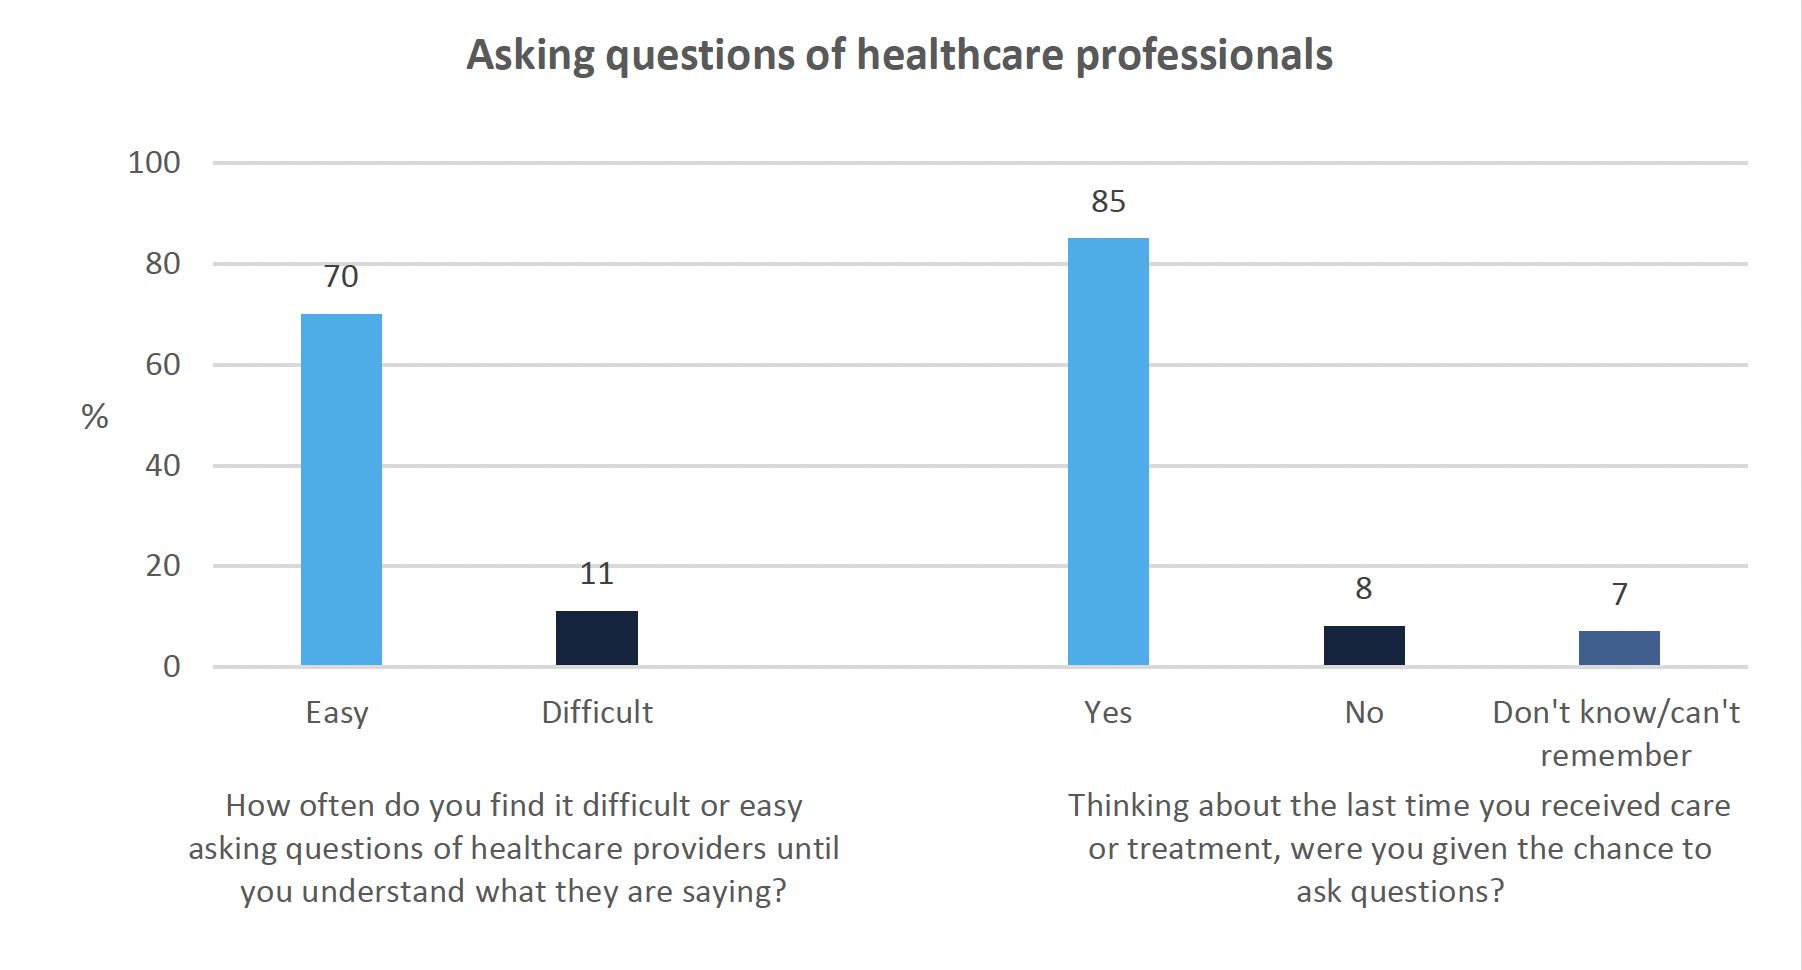 Multiple vertical bar graph showing views of ease and opportunity to ask questions
This multiple vertical bar graph shows two questions. The first question was ‘how often do you find it difficult or easy asking questions of healthcare providers until you understand what they are saying?’. For this question, 70% said they would find this easy. The second question was ‘thinking about the last time you received care or treatment, were you given the chance to ask questions?’. For this question, 85% of respondents who had contacted any health provider in the last 12 months said yes.